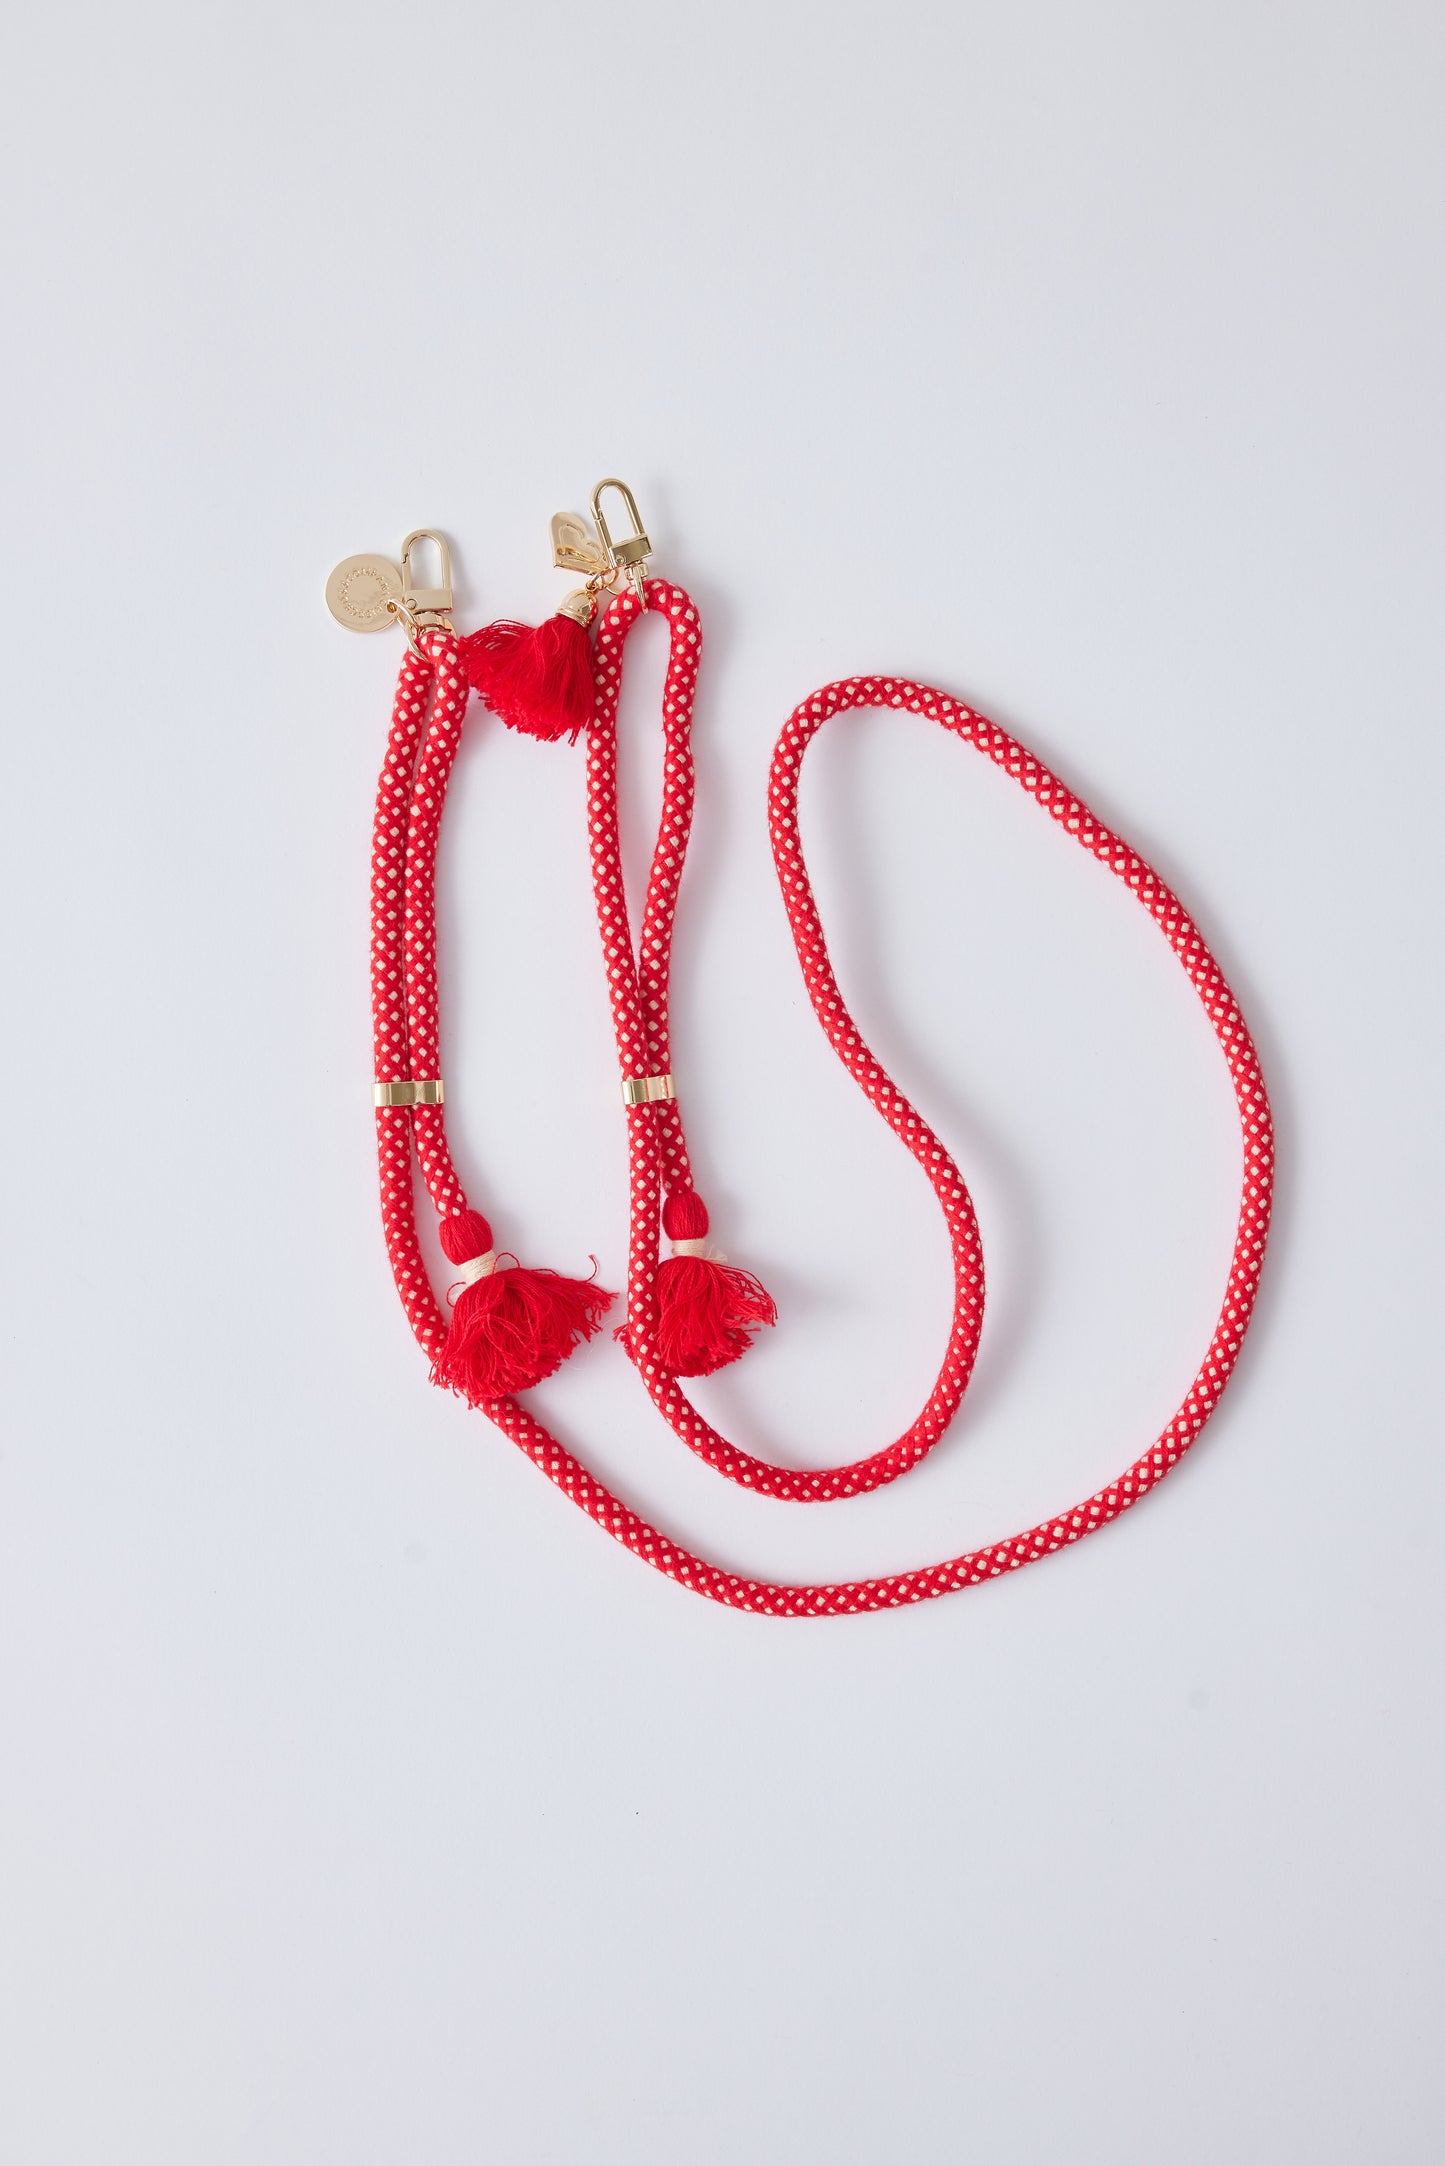 Cotton Phone Straps - with double carabiners, detachable